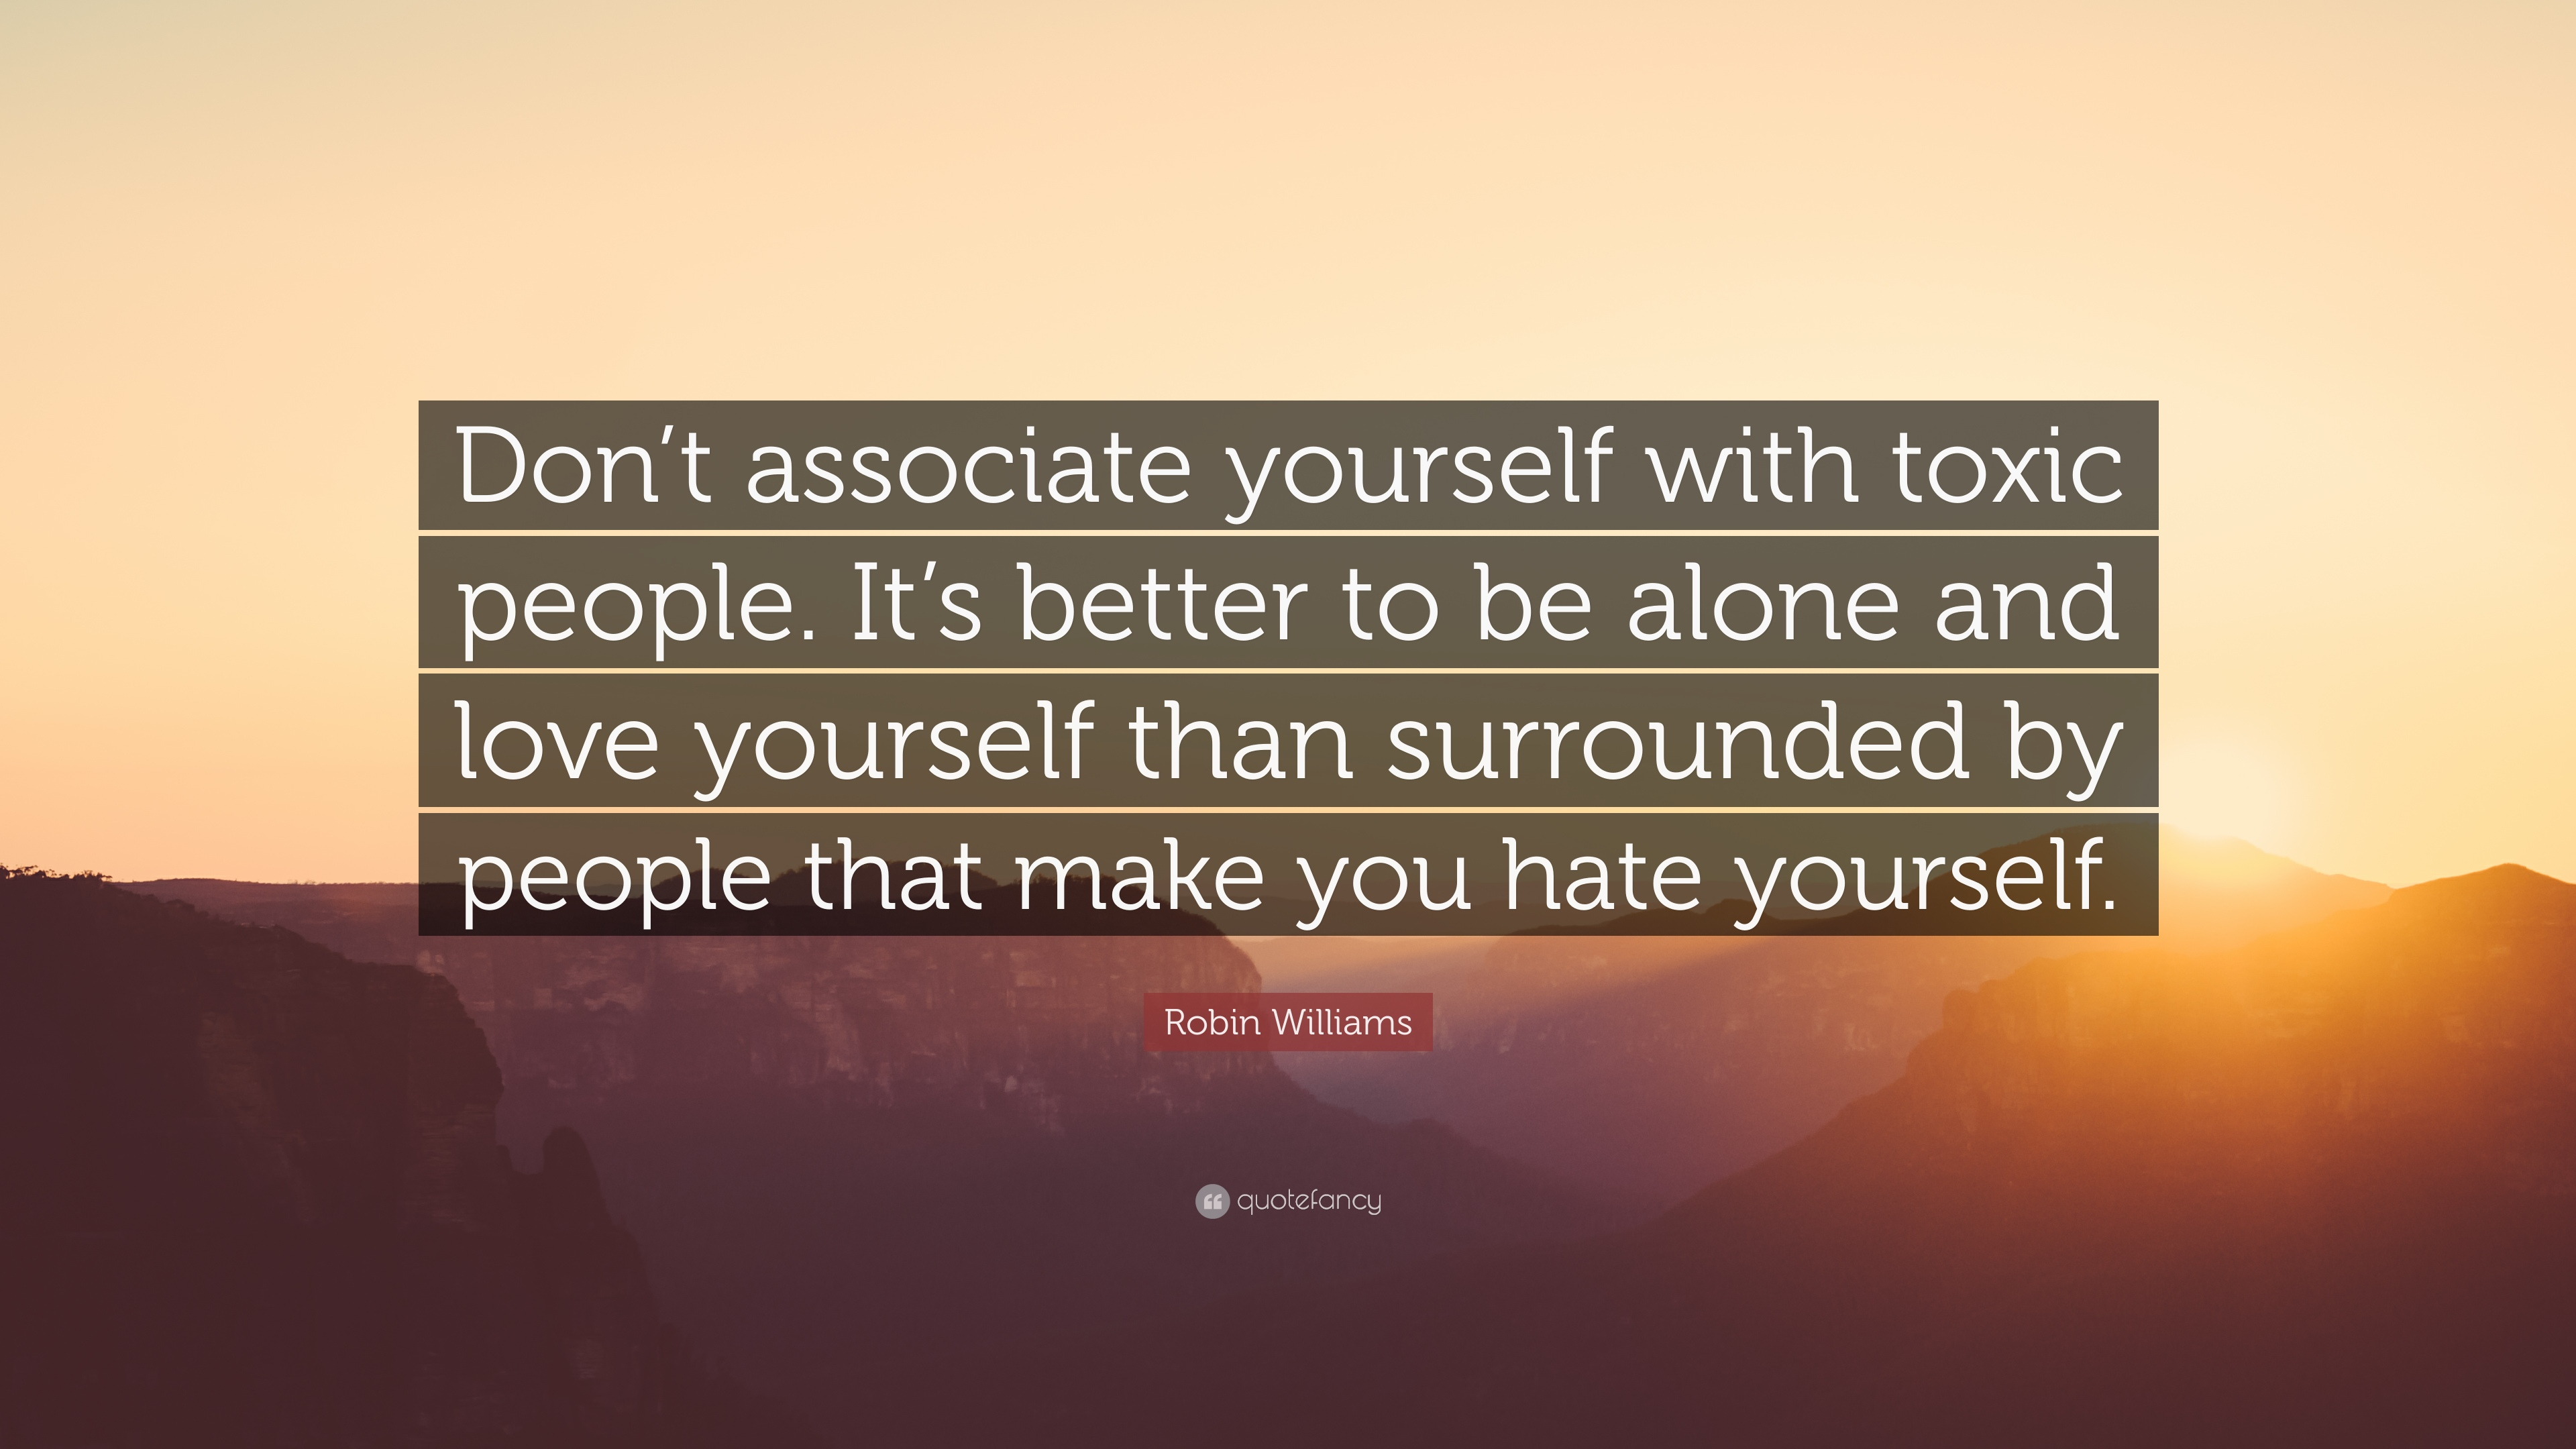 13 Toxic People Quotes That Reveal A Multitude Of Ills In The World